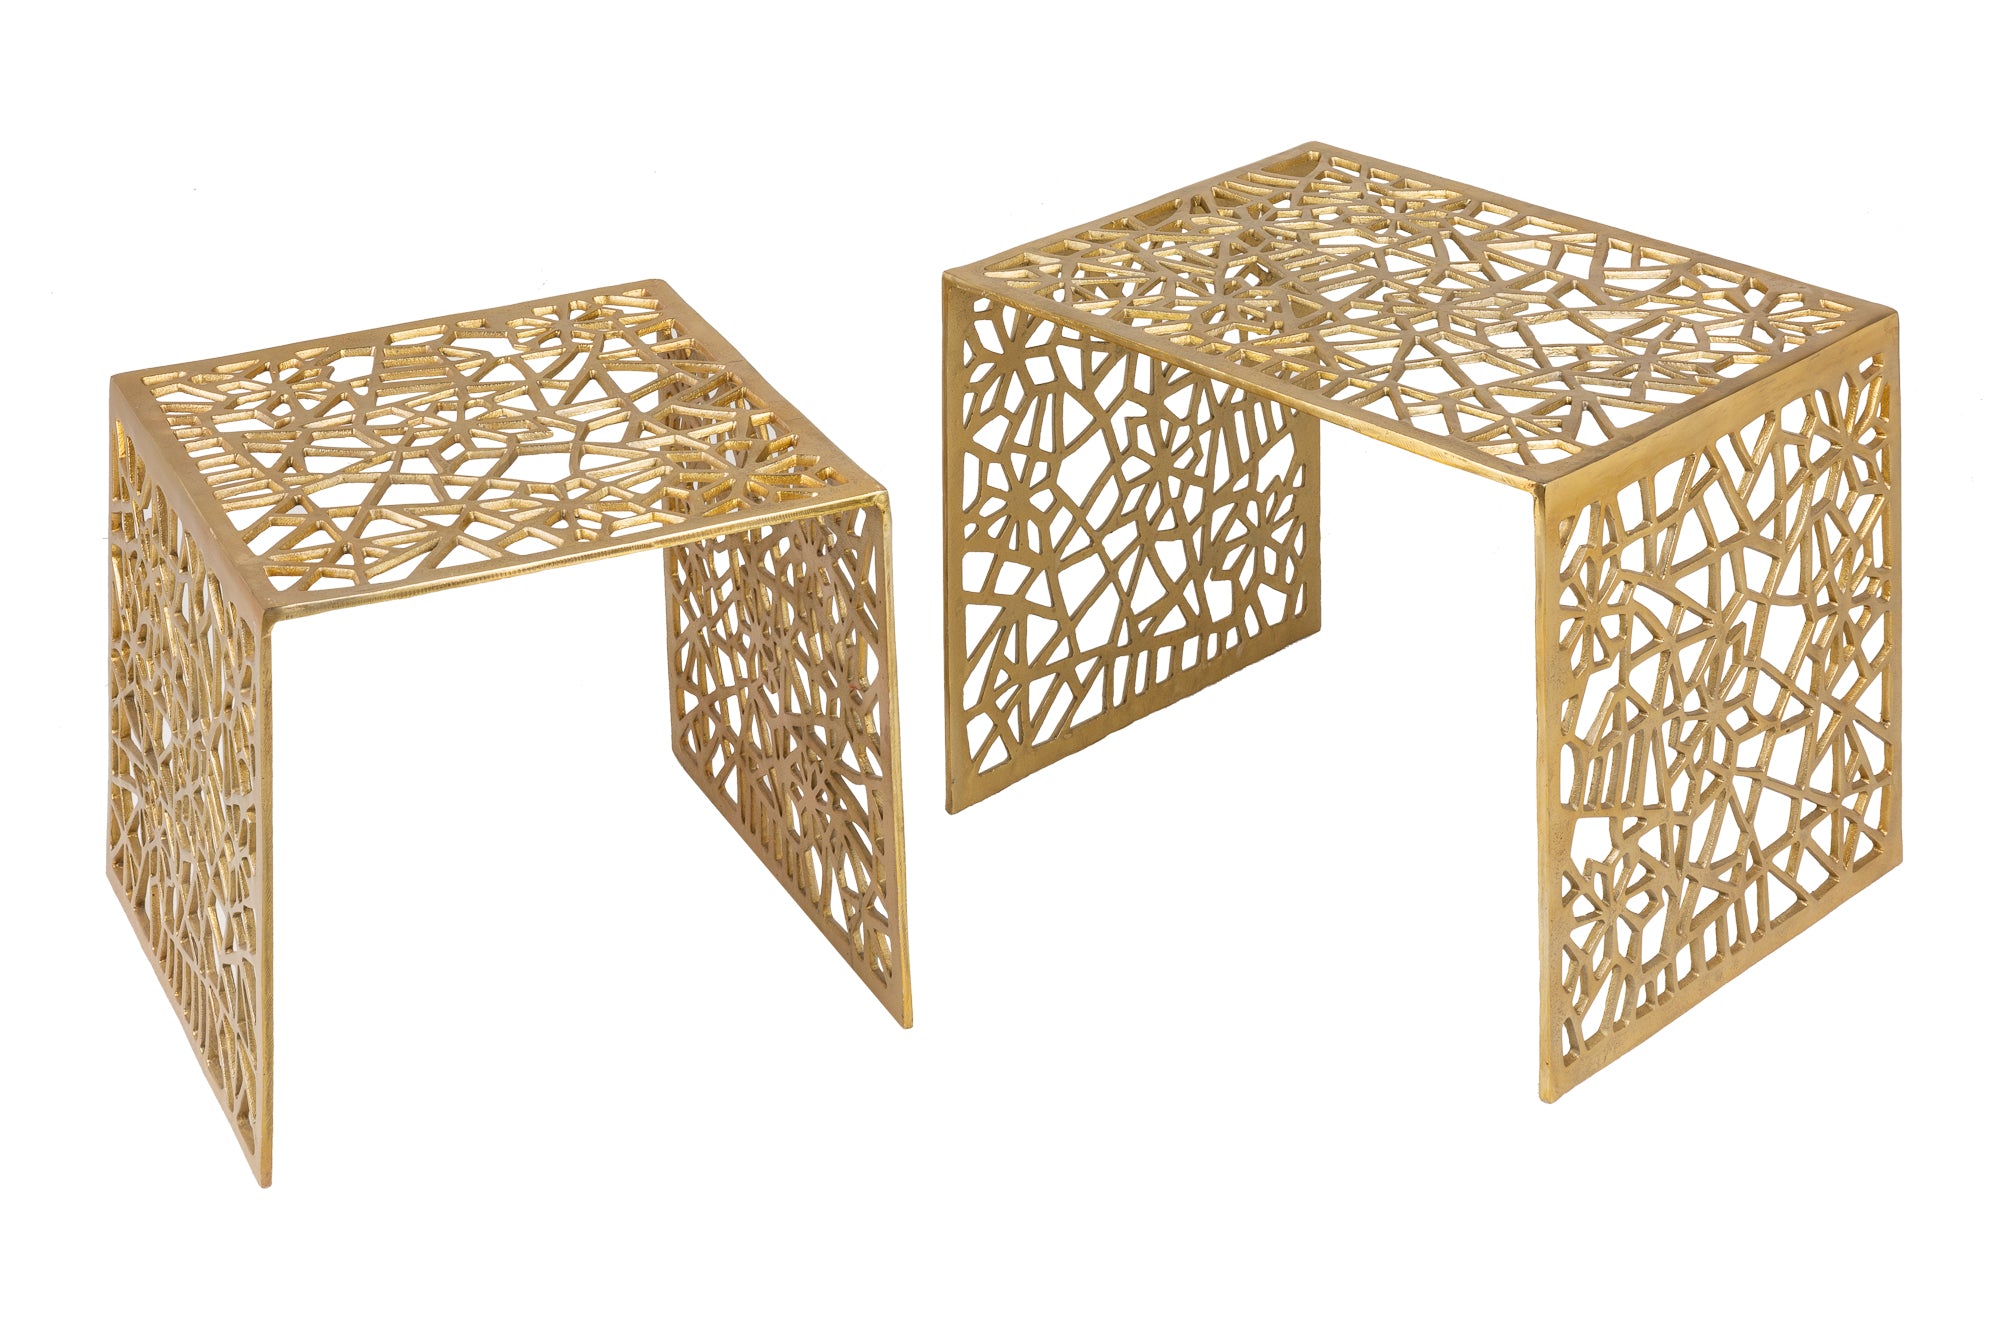 Nesting Coffee Table Abstract set of 2 Gold